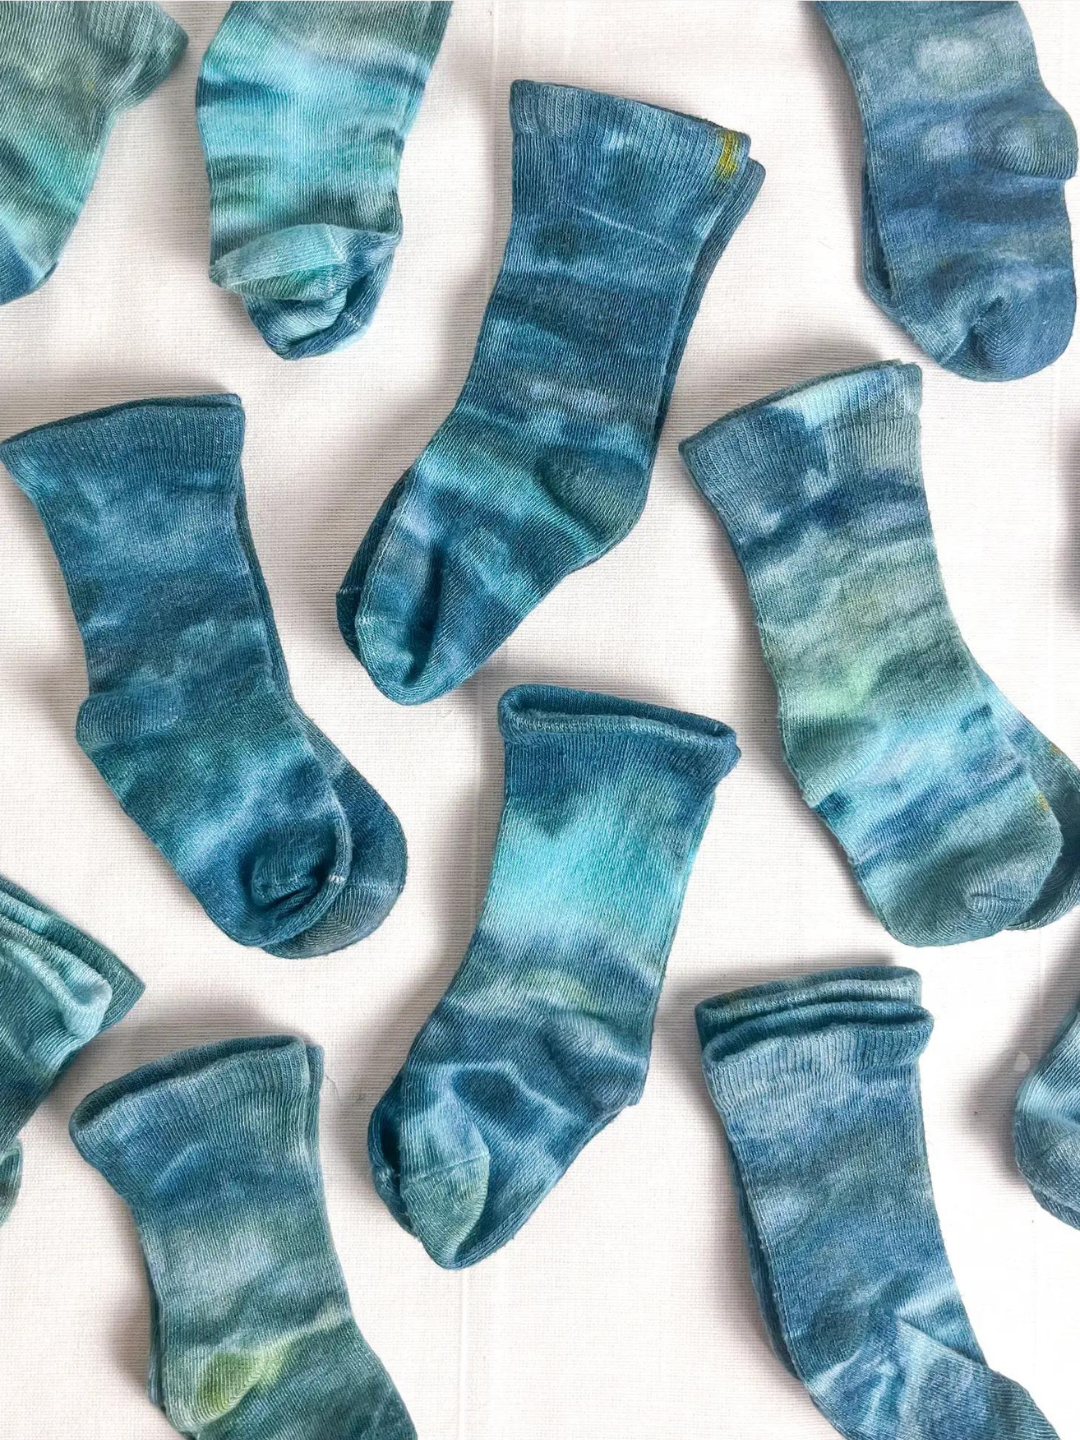 Blue Lagoon | Multiple pairs of baby ankle socks in dappled shades of blue and green